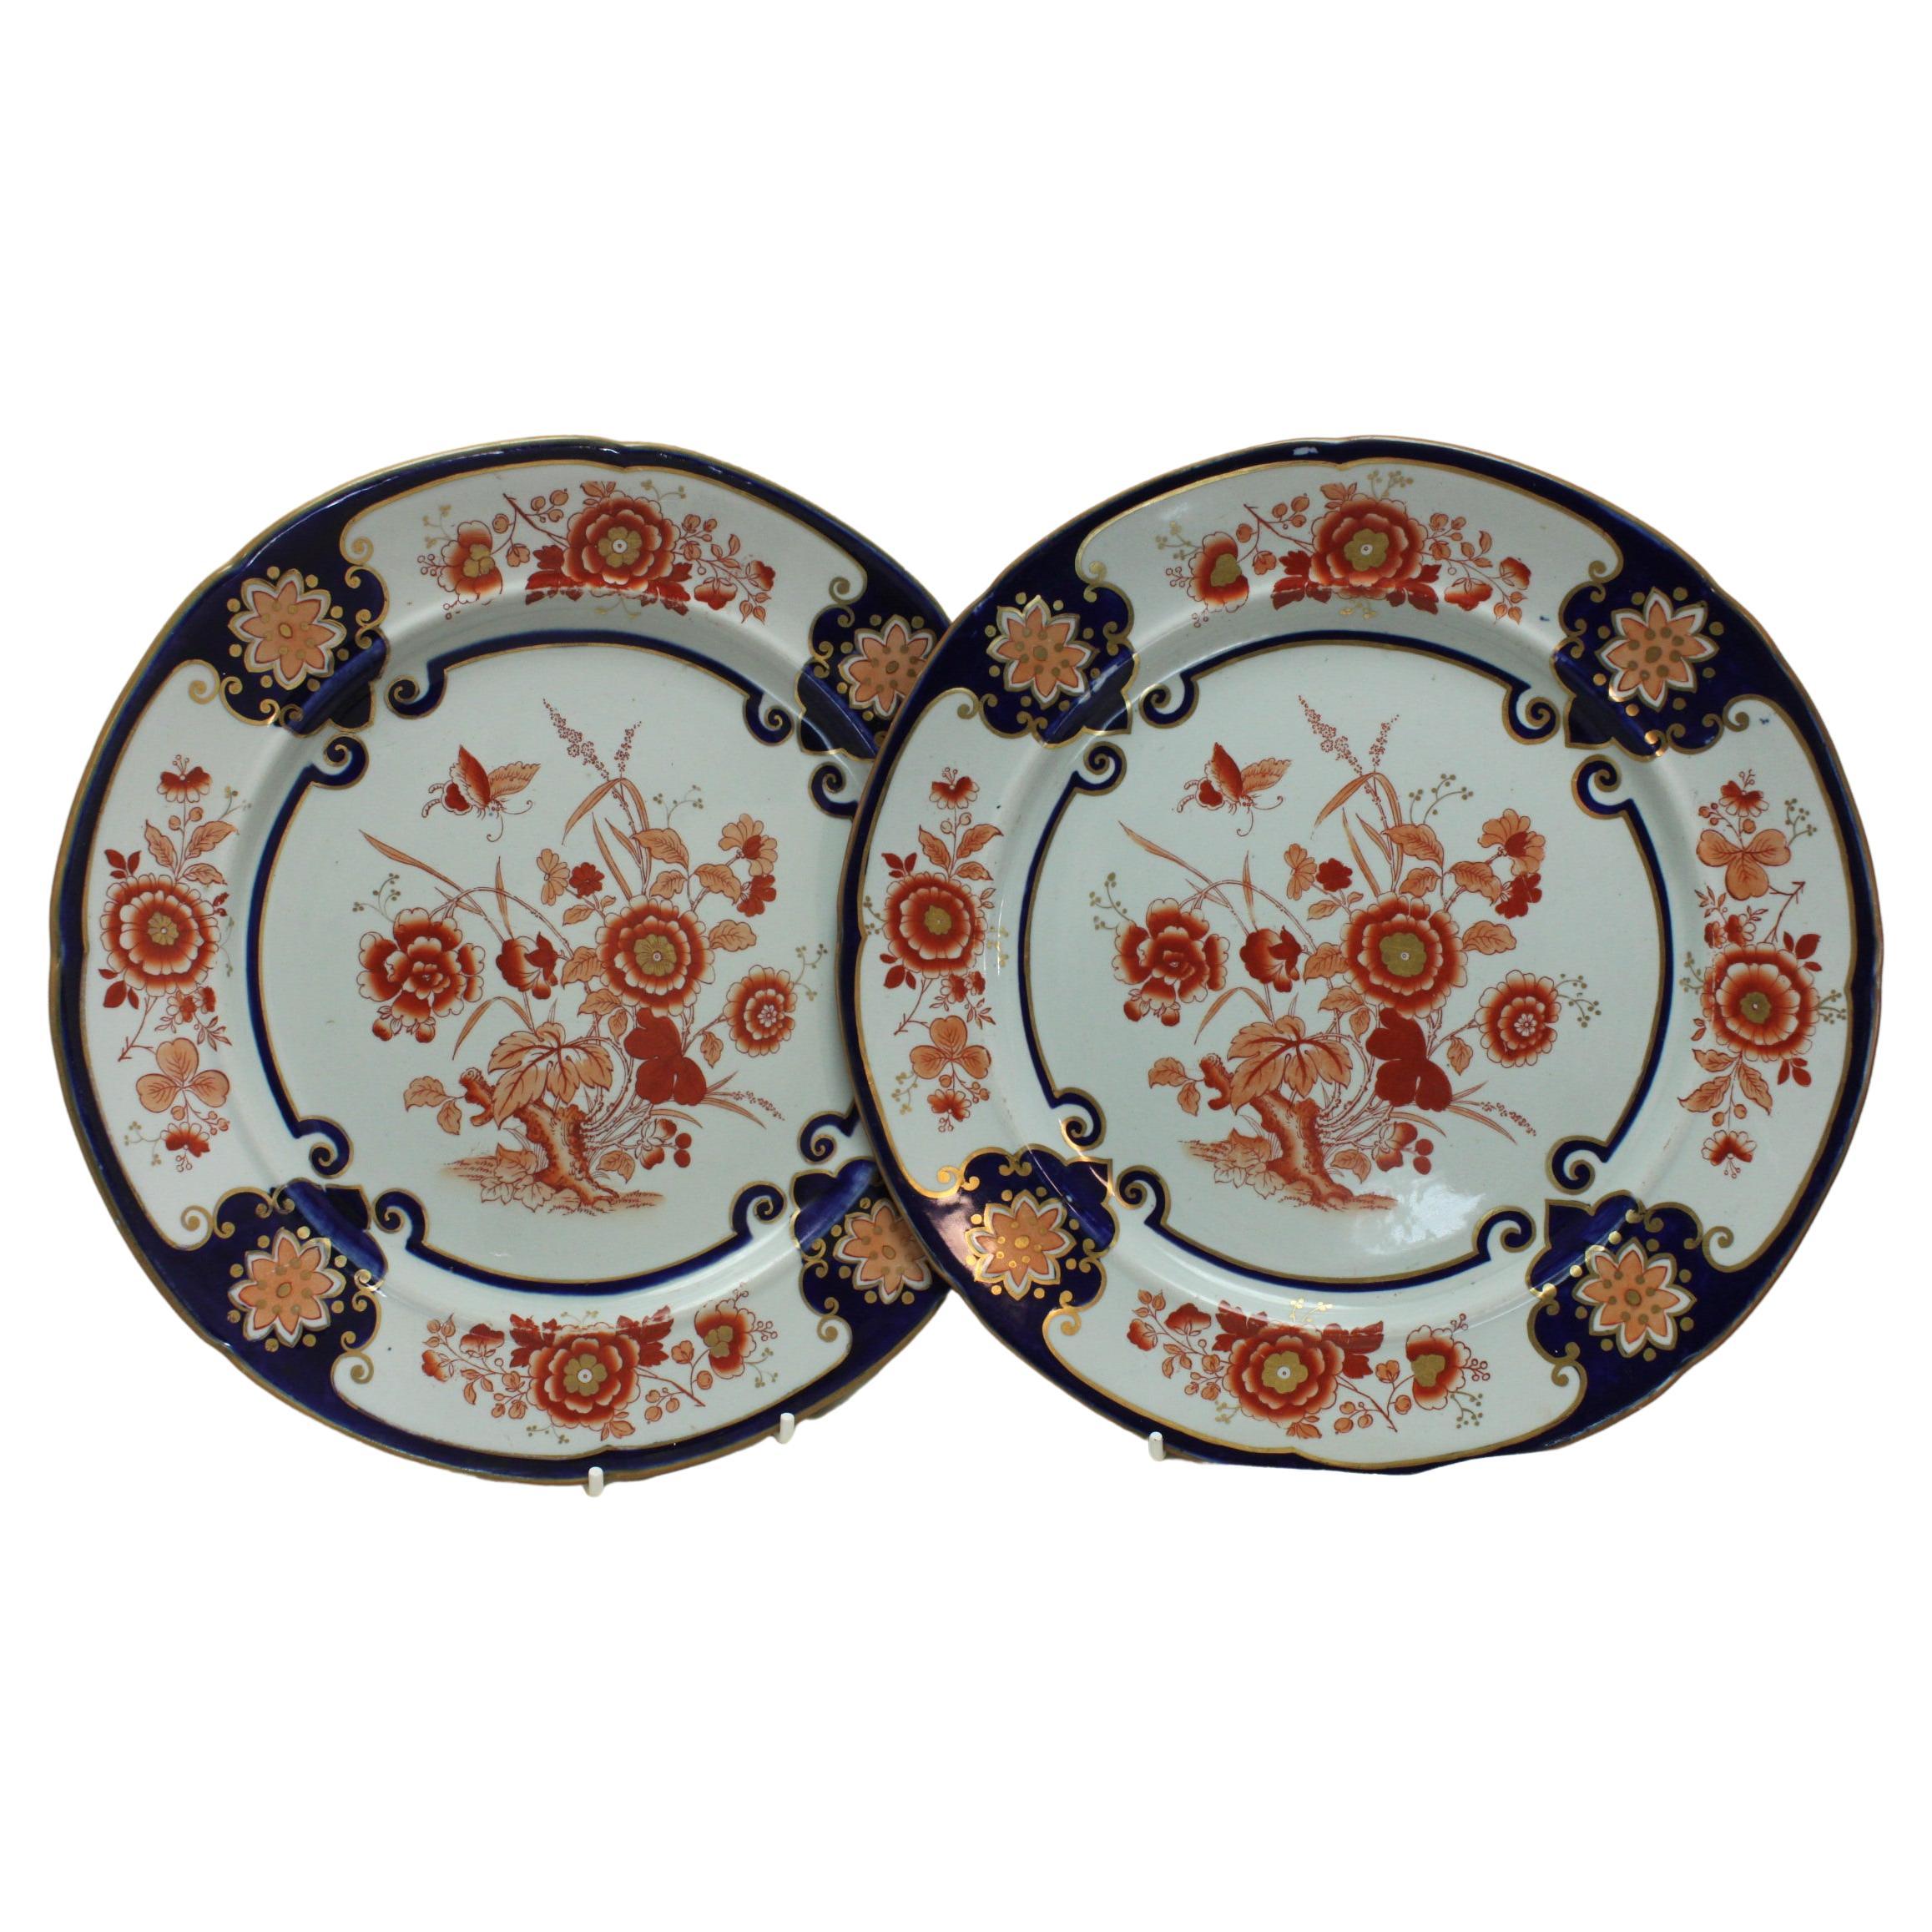 Pair of Ashworth's Ironstone Plates Pattern 3/792 For Sale